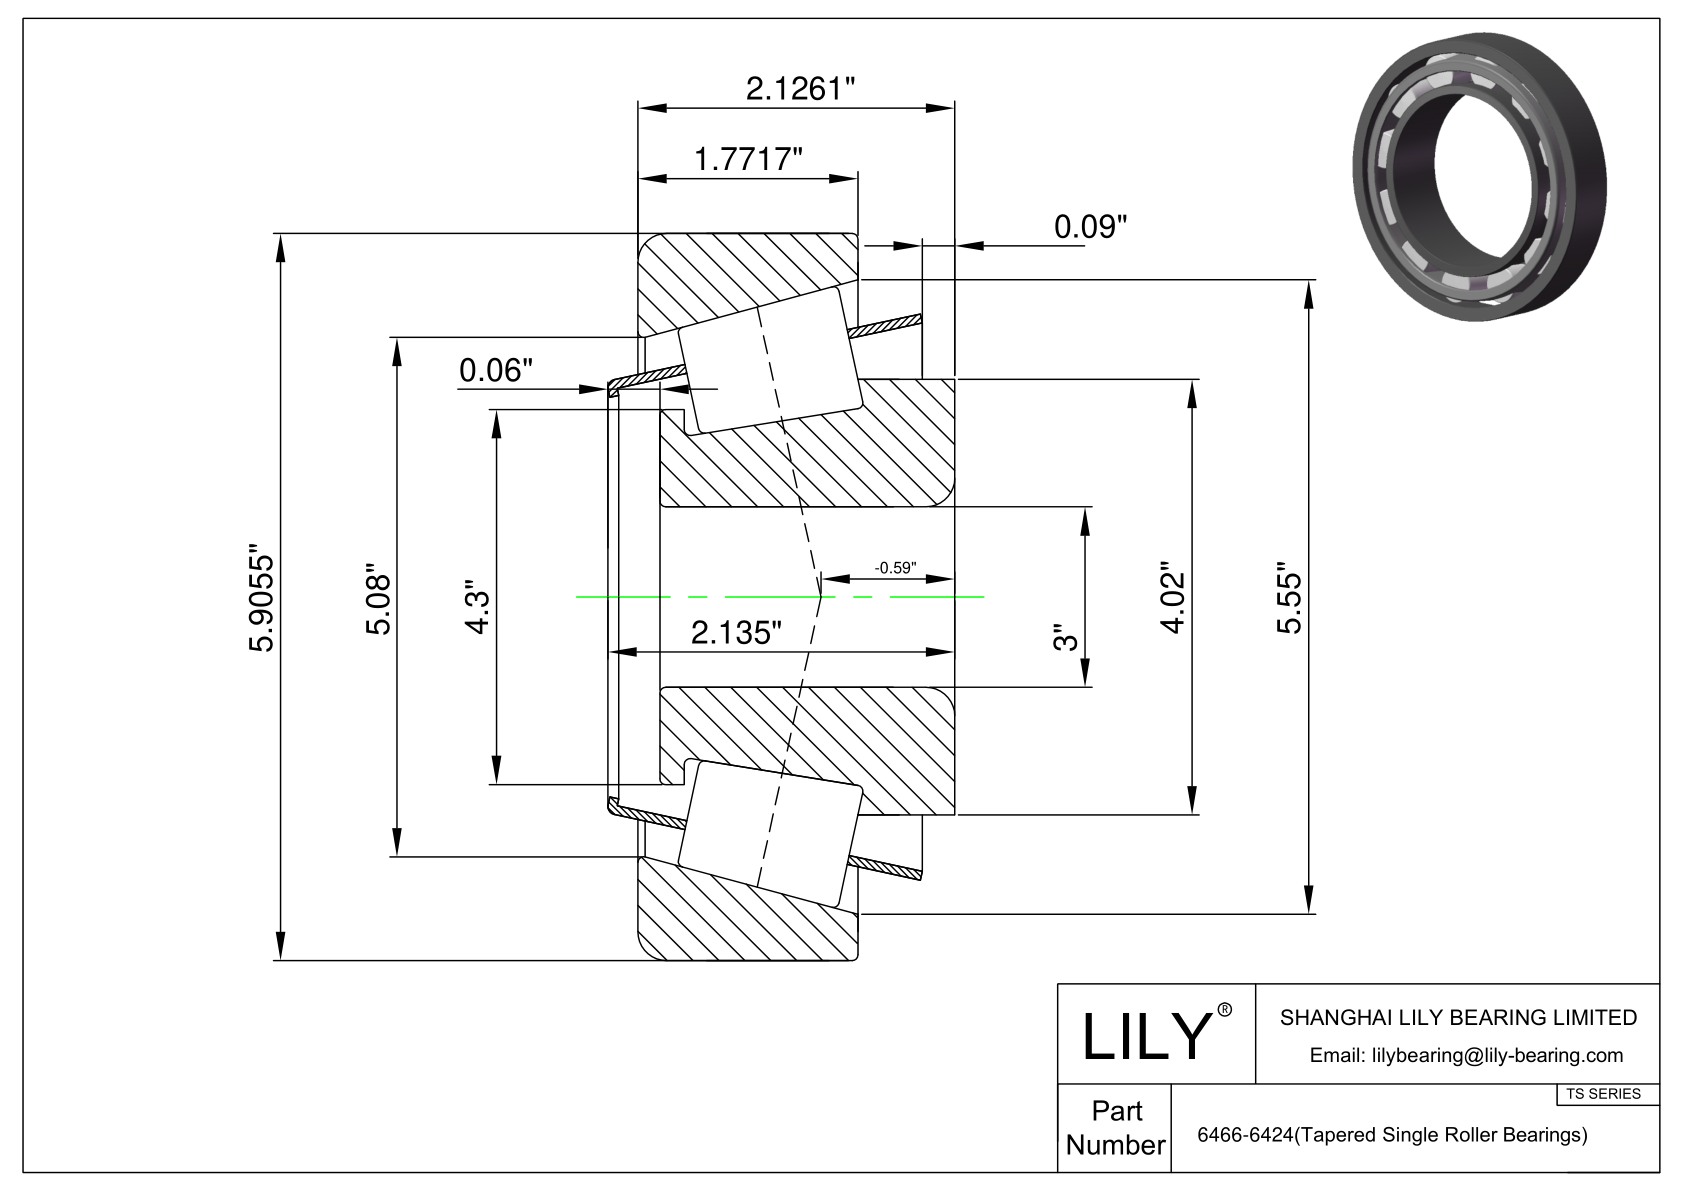 6466-6424 TS (Tapered Single Roller Bearings) (Imperial) cad drawing